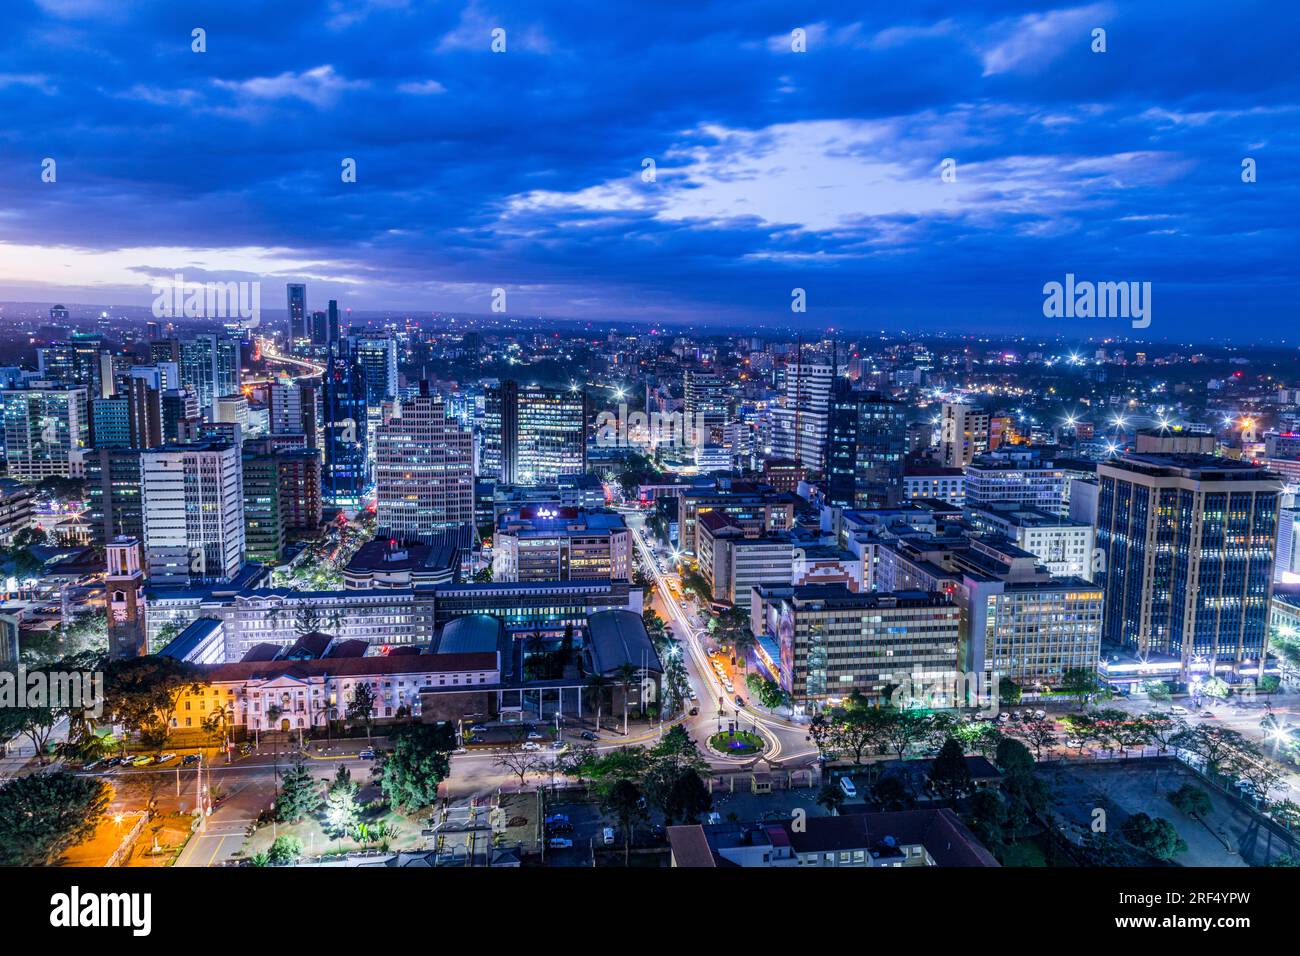 Nairobi City County Night Life Skyline Cityscapes Skyscrapers Landmark Tall Modern Buildings Architectural Highrise Towers In Kenya East Africa Capit Stock Photo